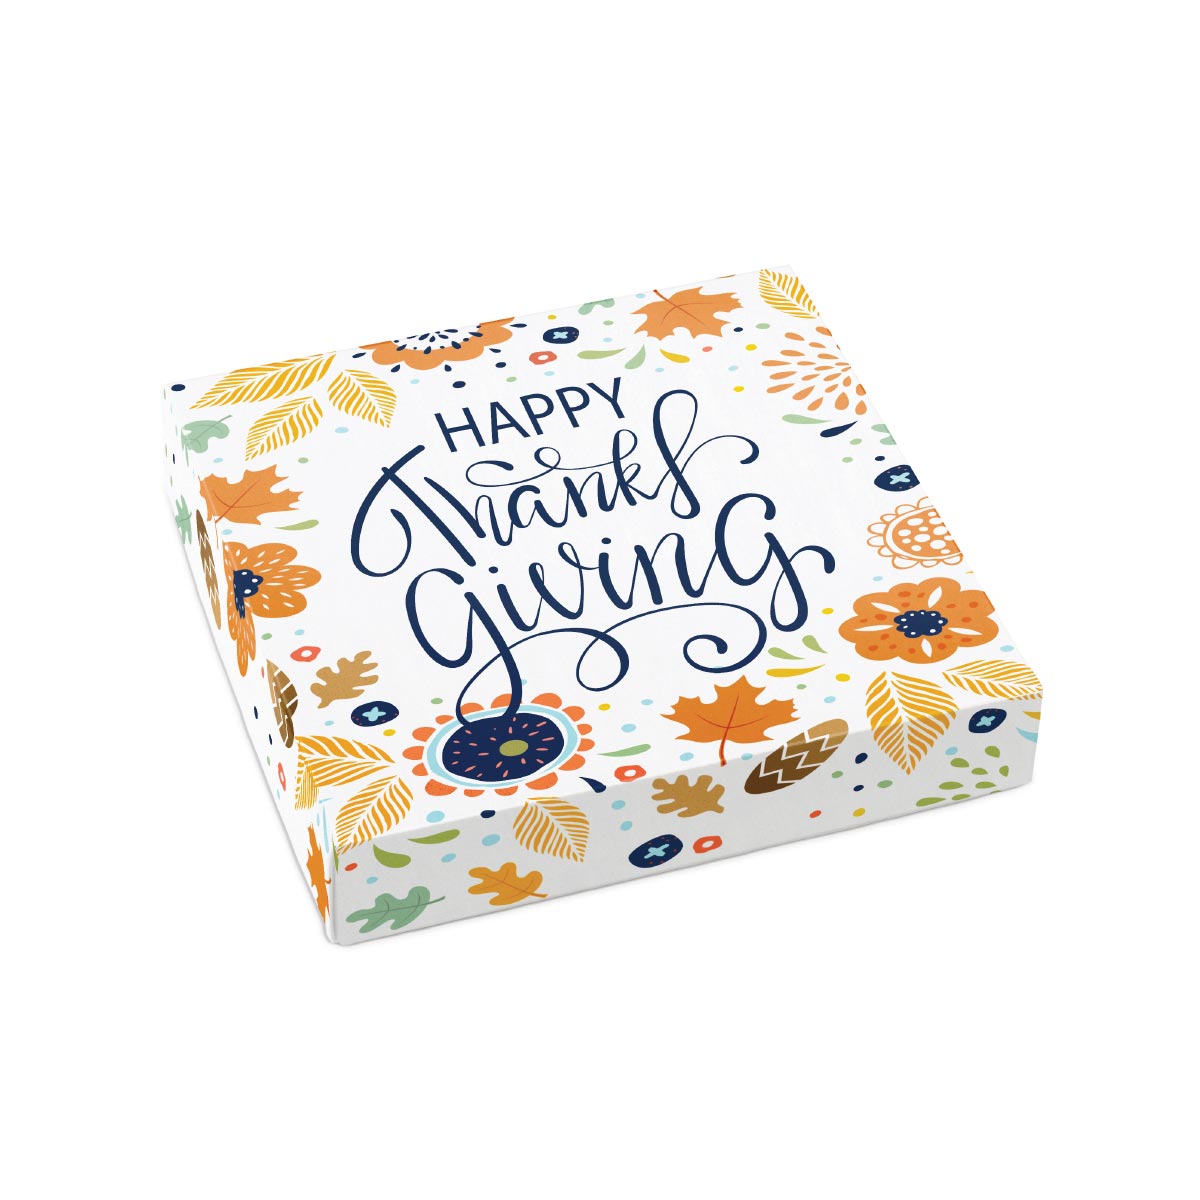 Thanksgiving Themed Box Cover for 16 Piece Holiday Assortment